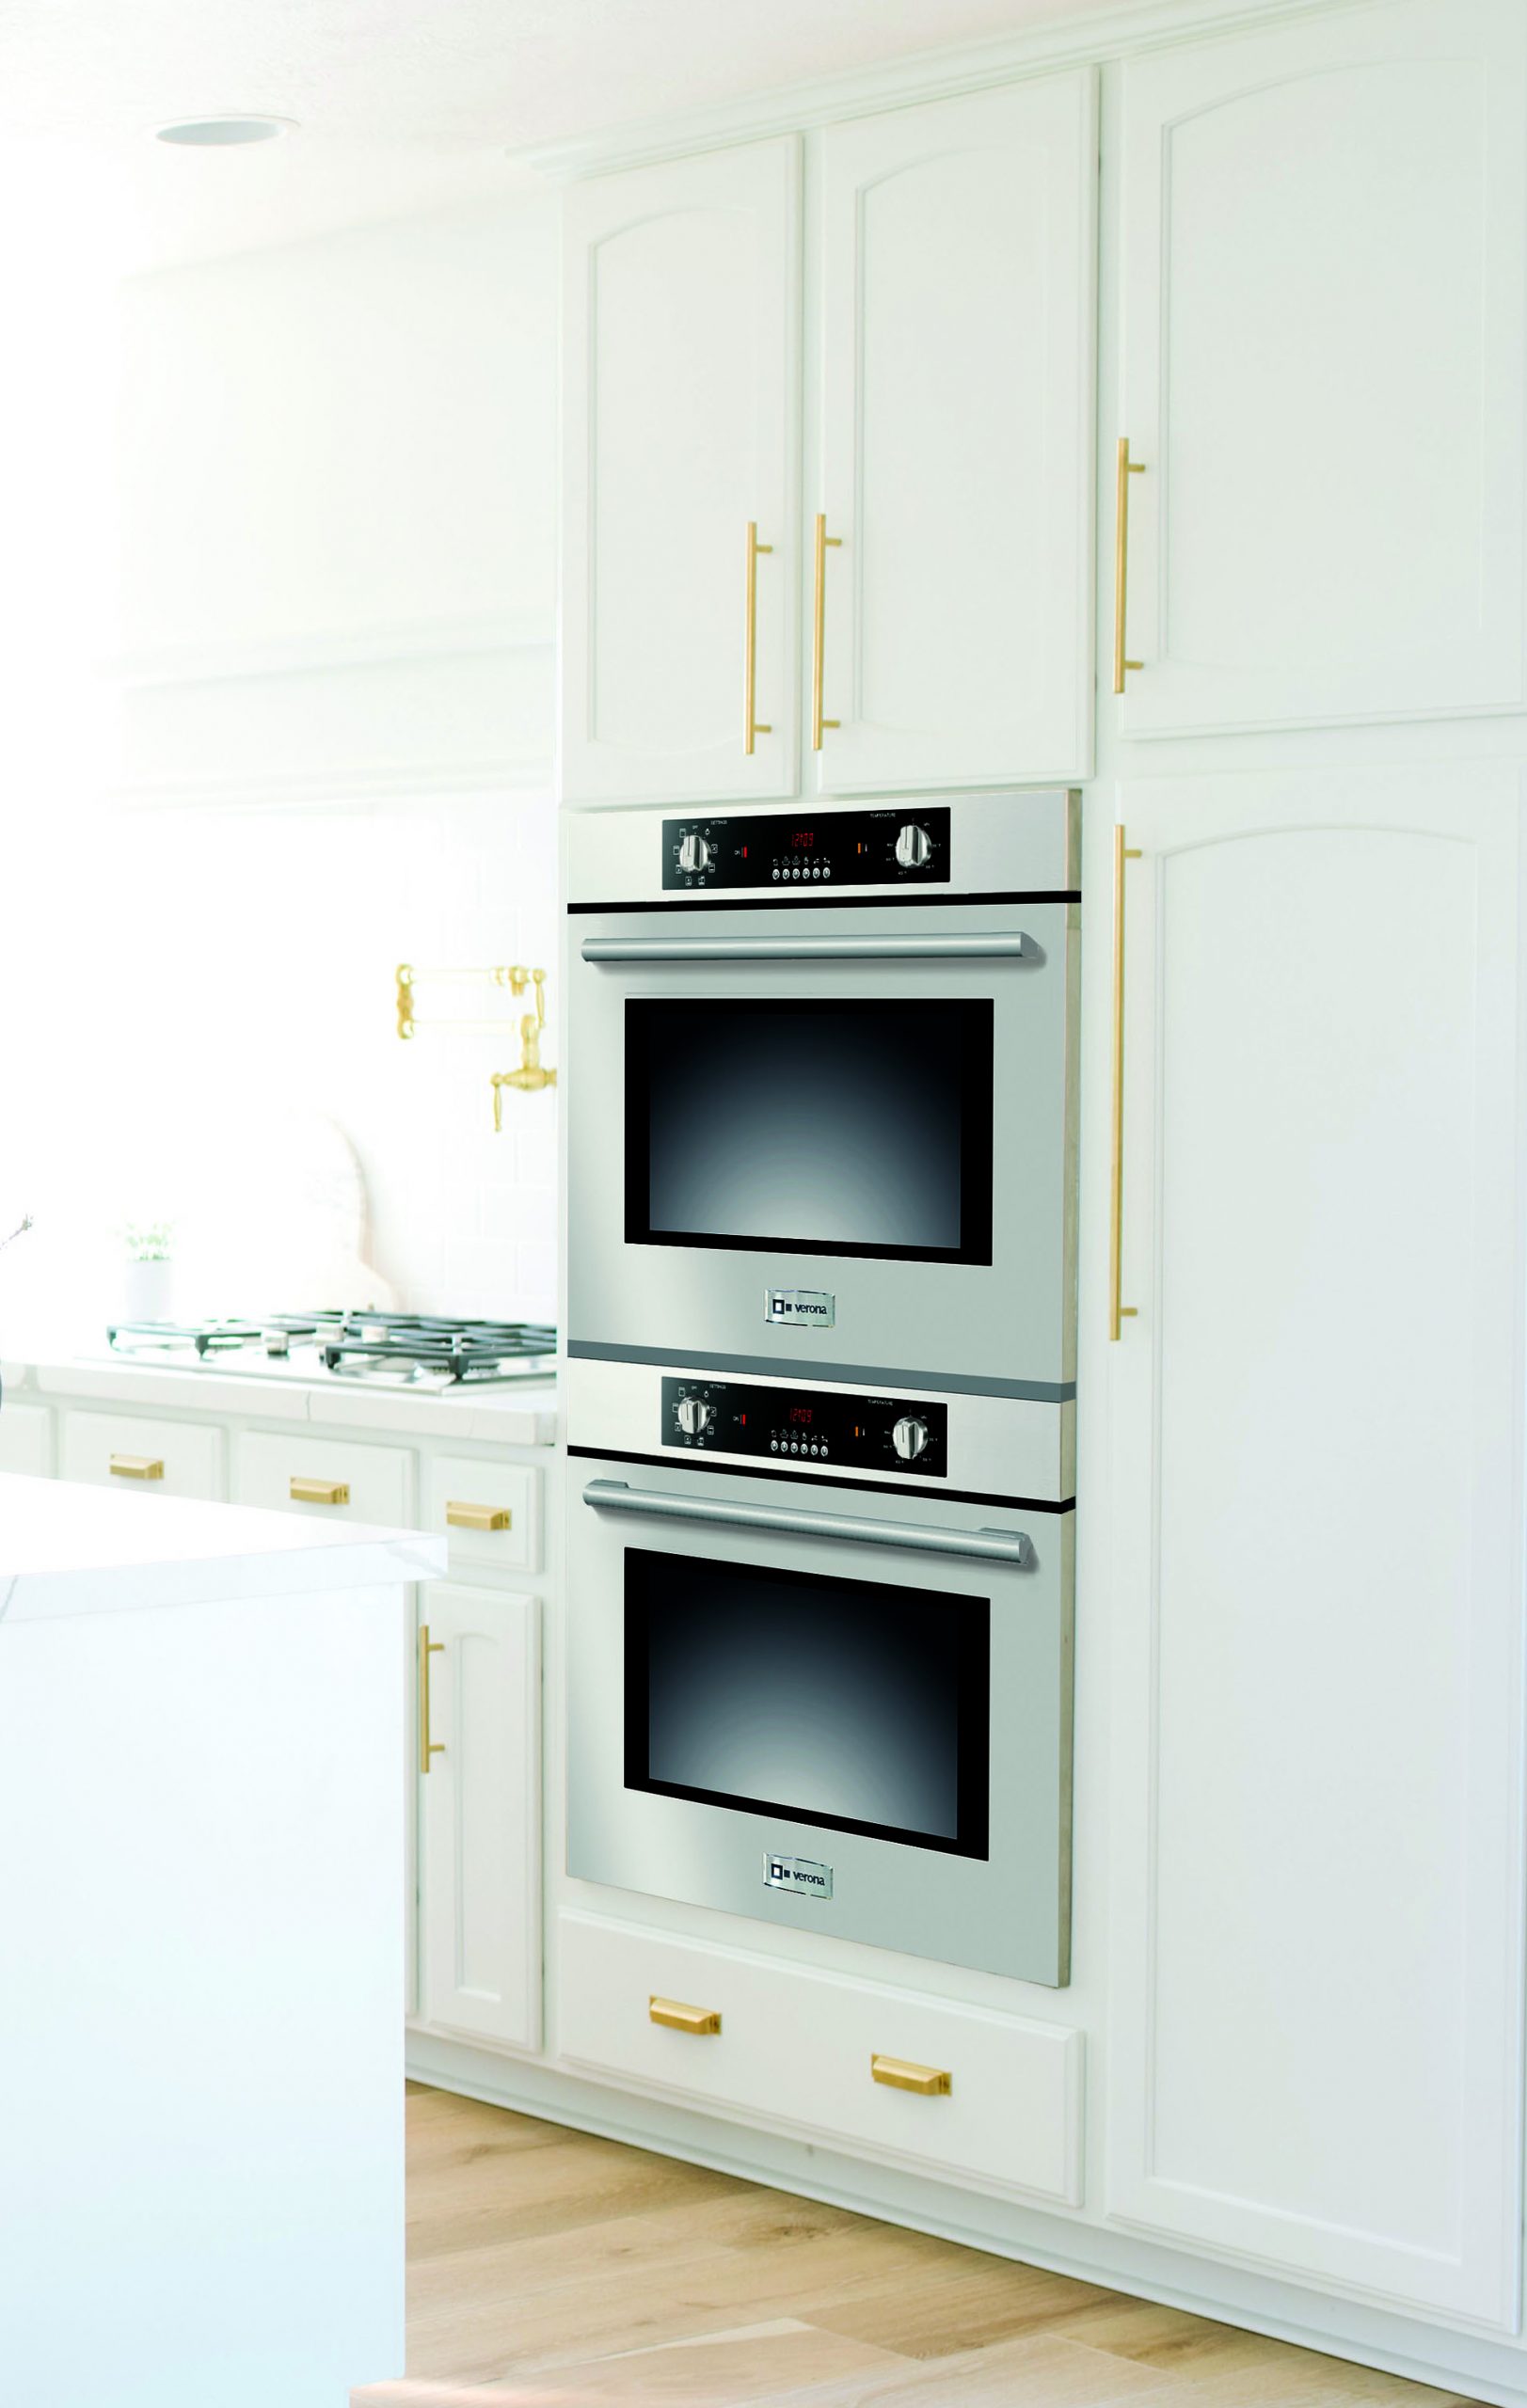 How To Clean A Self-Cleaning Oven: 7 Kitchen Cleaning Tips - Clean